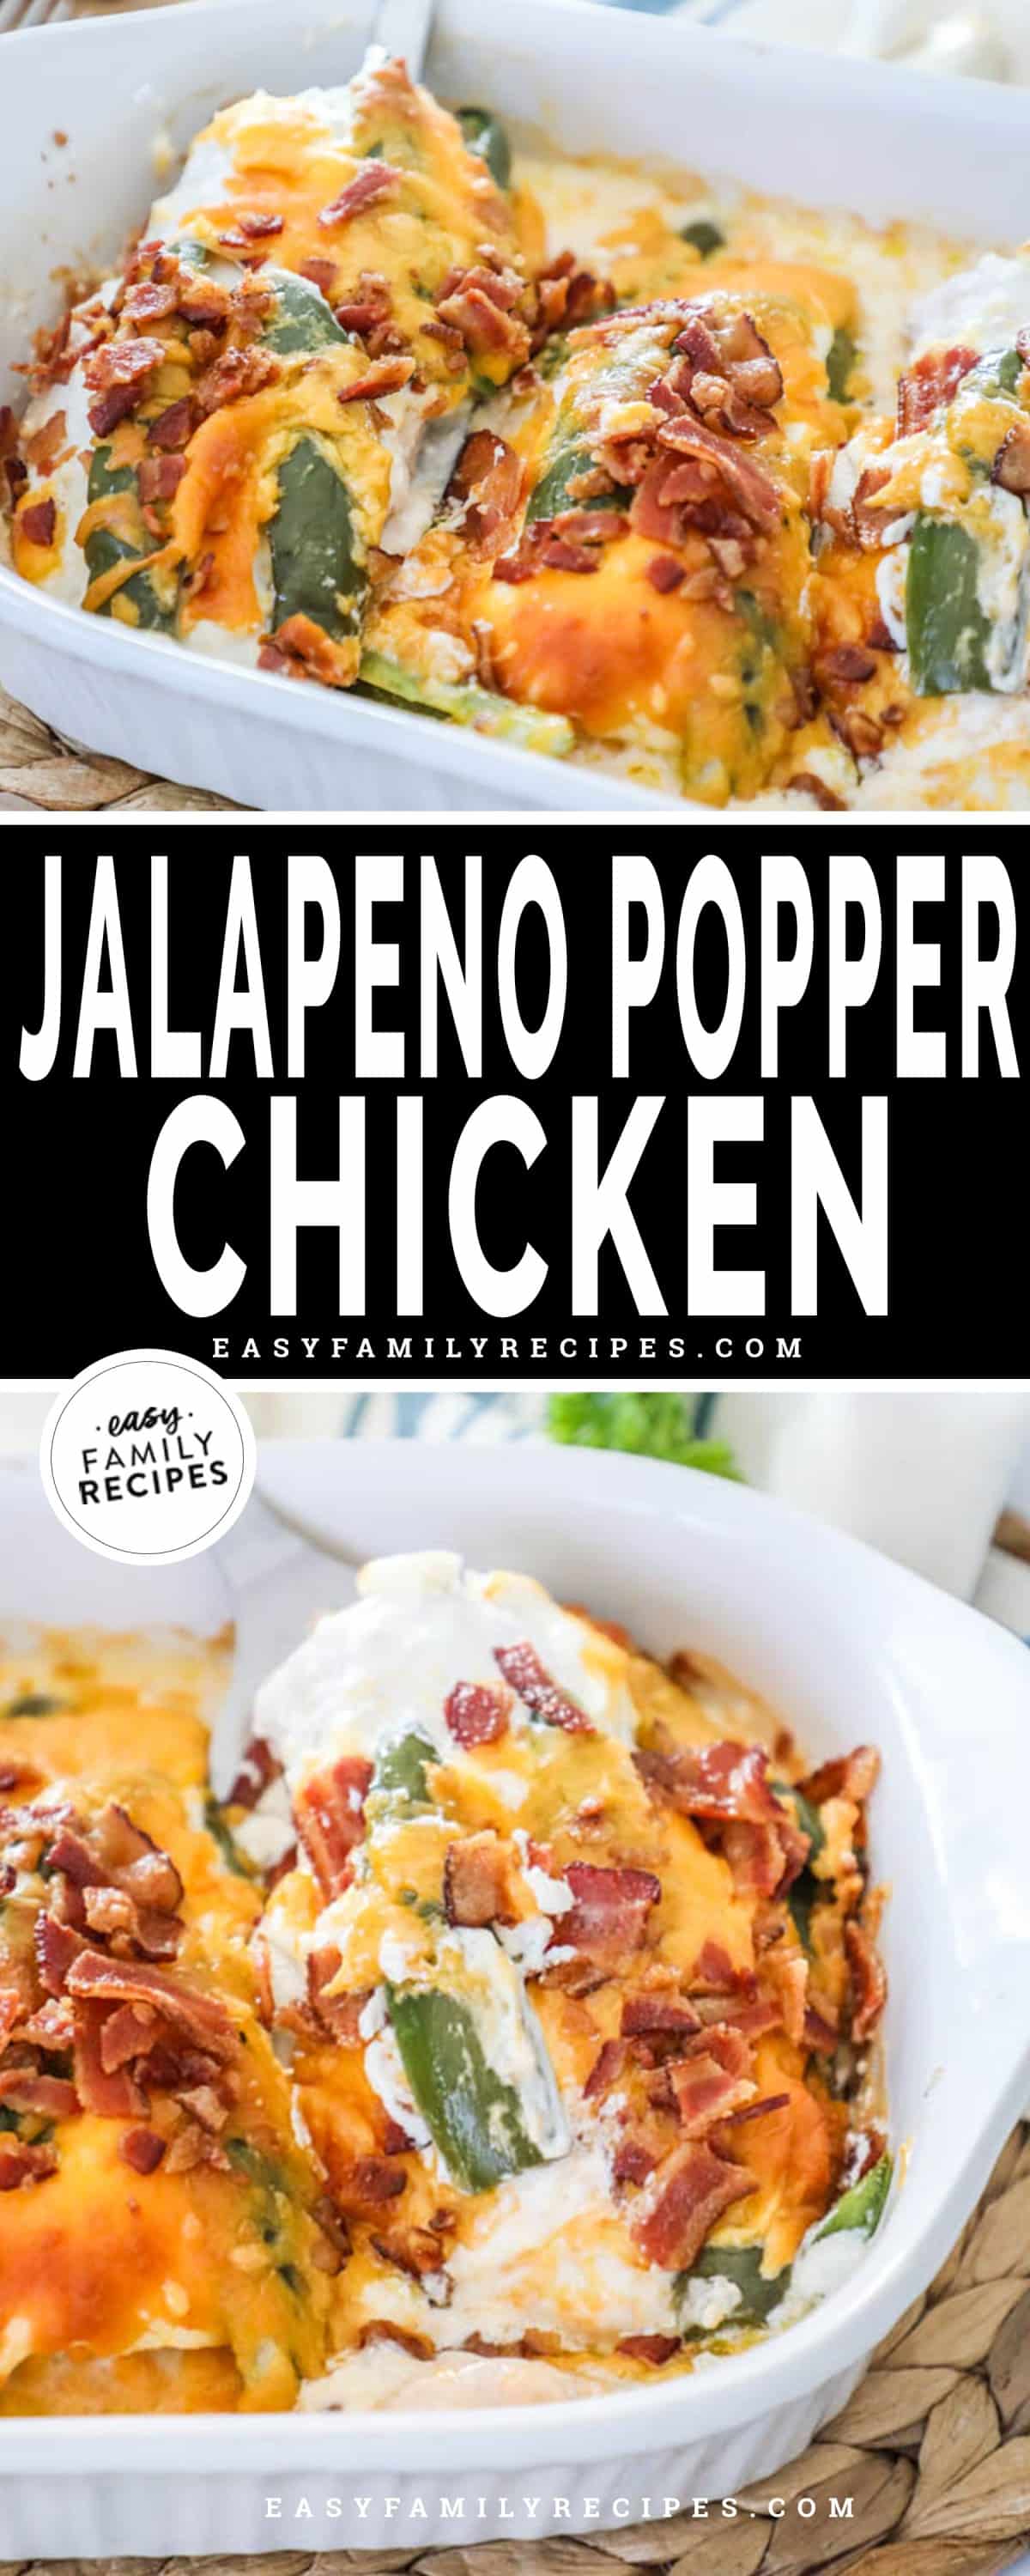 Jalapeno Popper Chicken topped with bacon being lifted out of the casserole dish